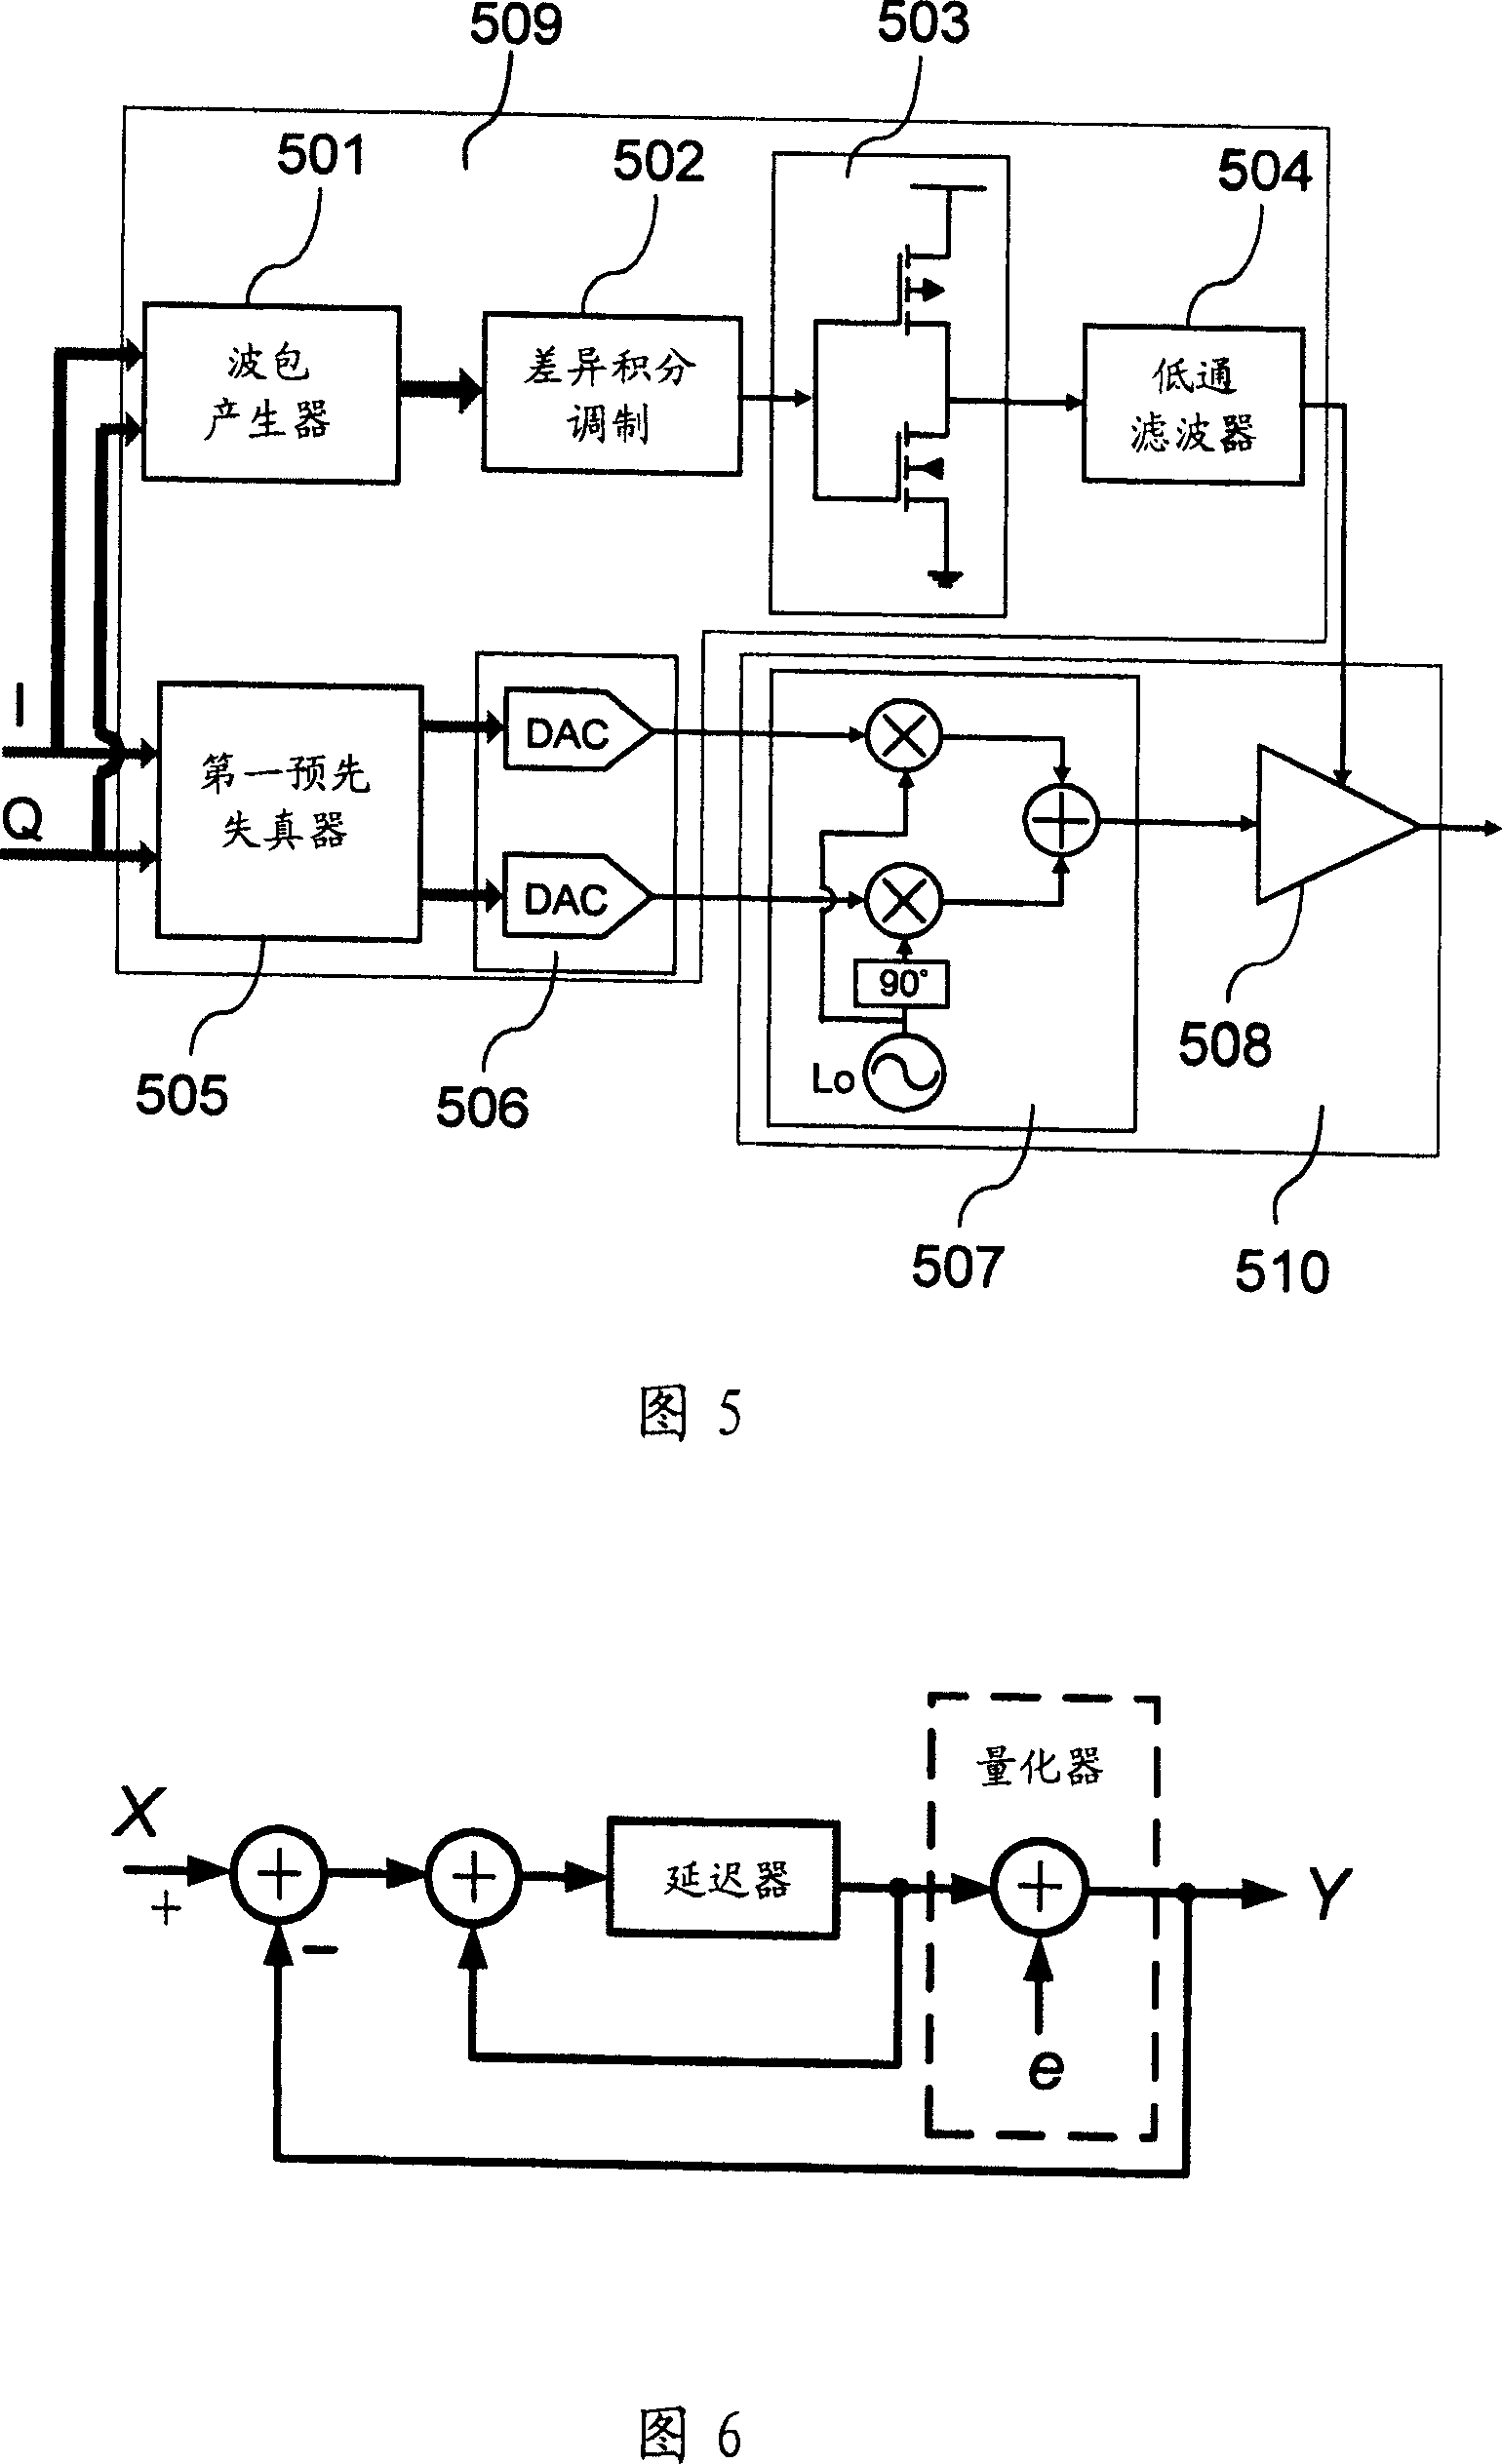 Transmitter and its base frequency processor and RF power amplifier modulating method